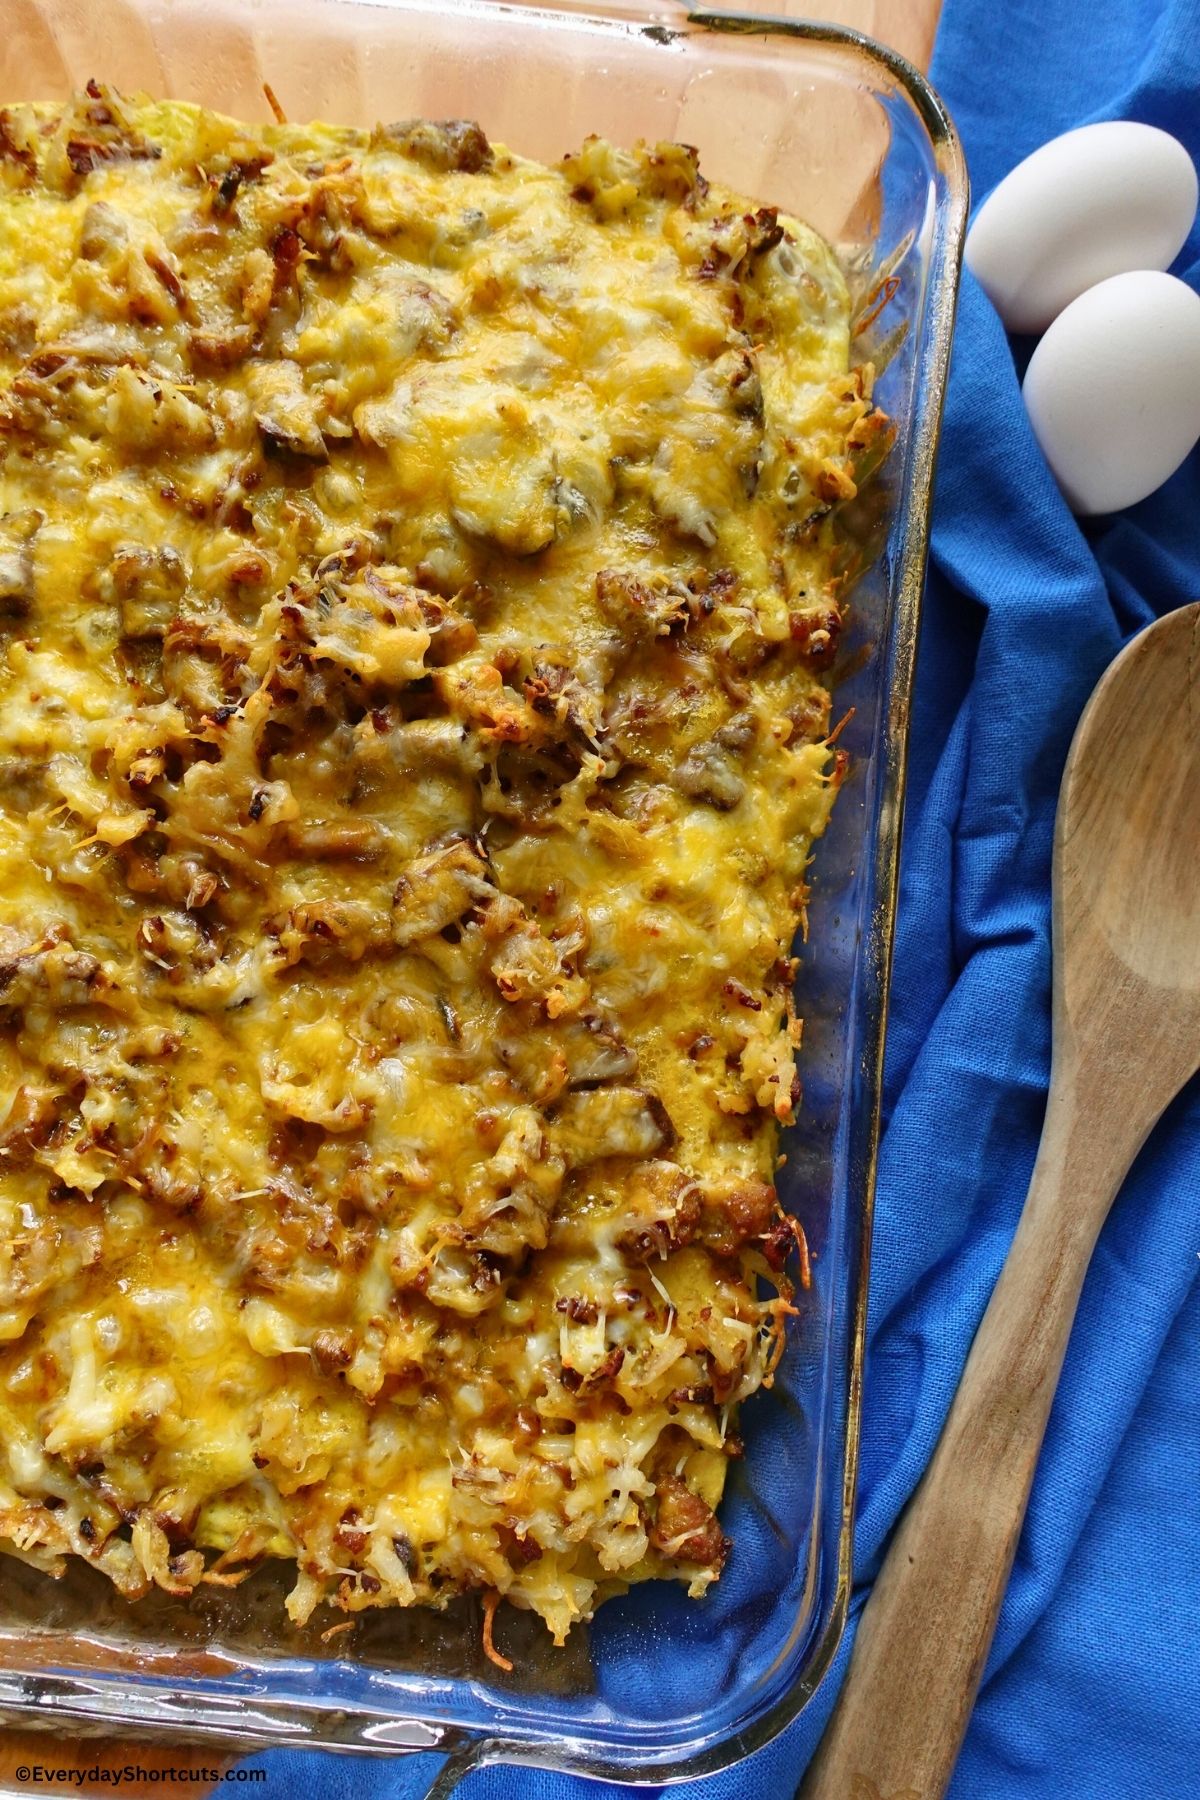 steak and egg casserole cooked in a baking dish